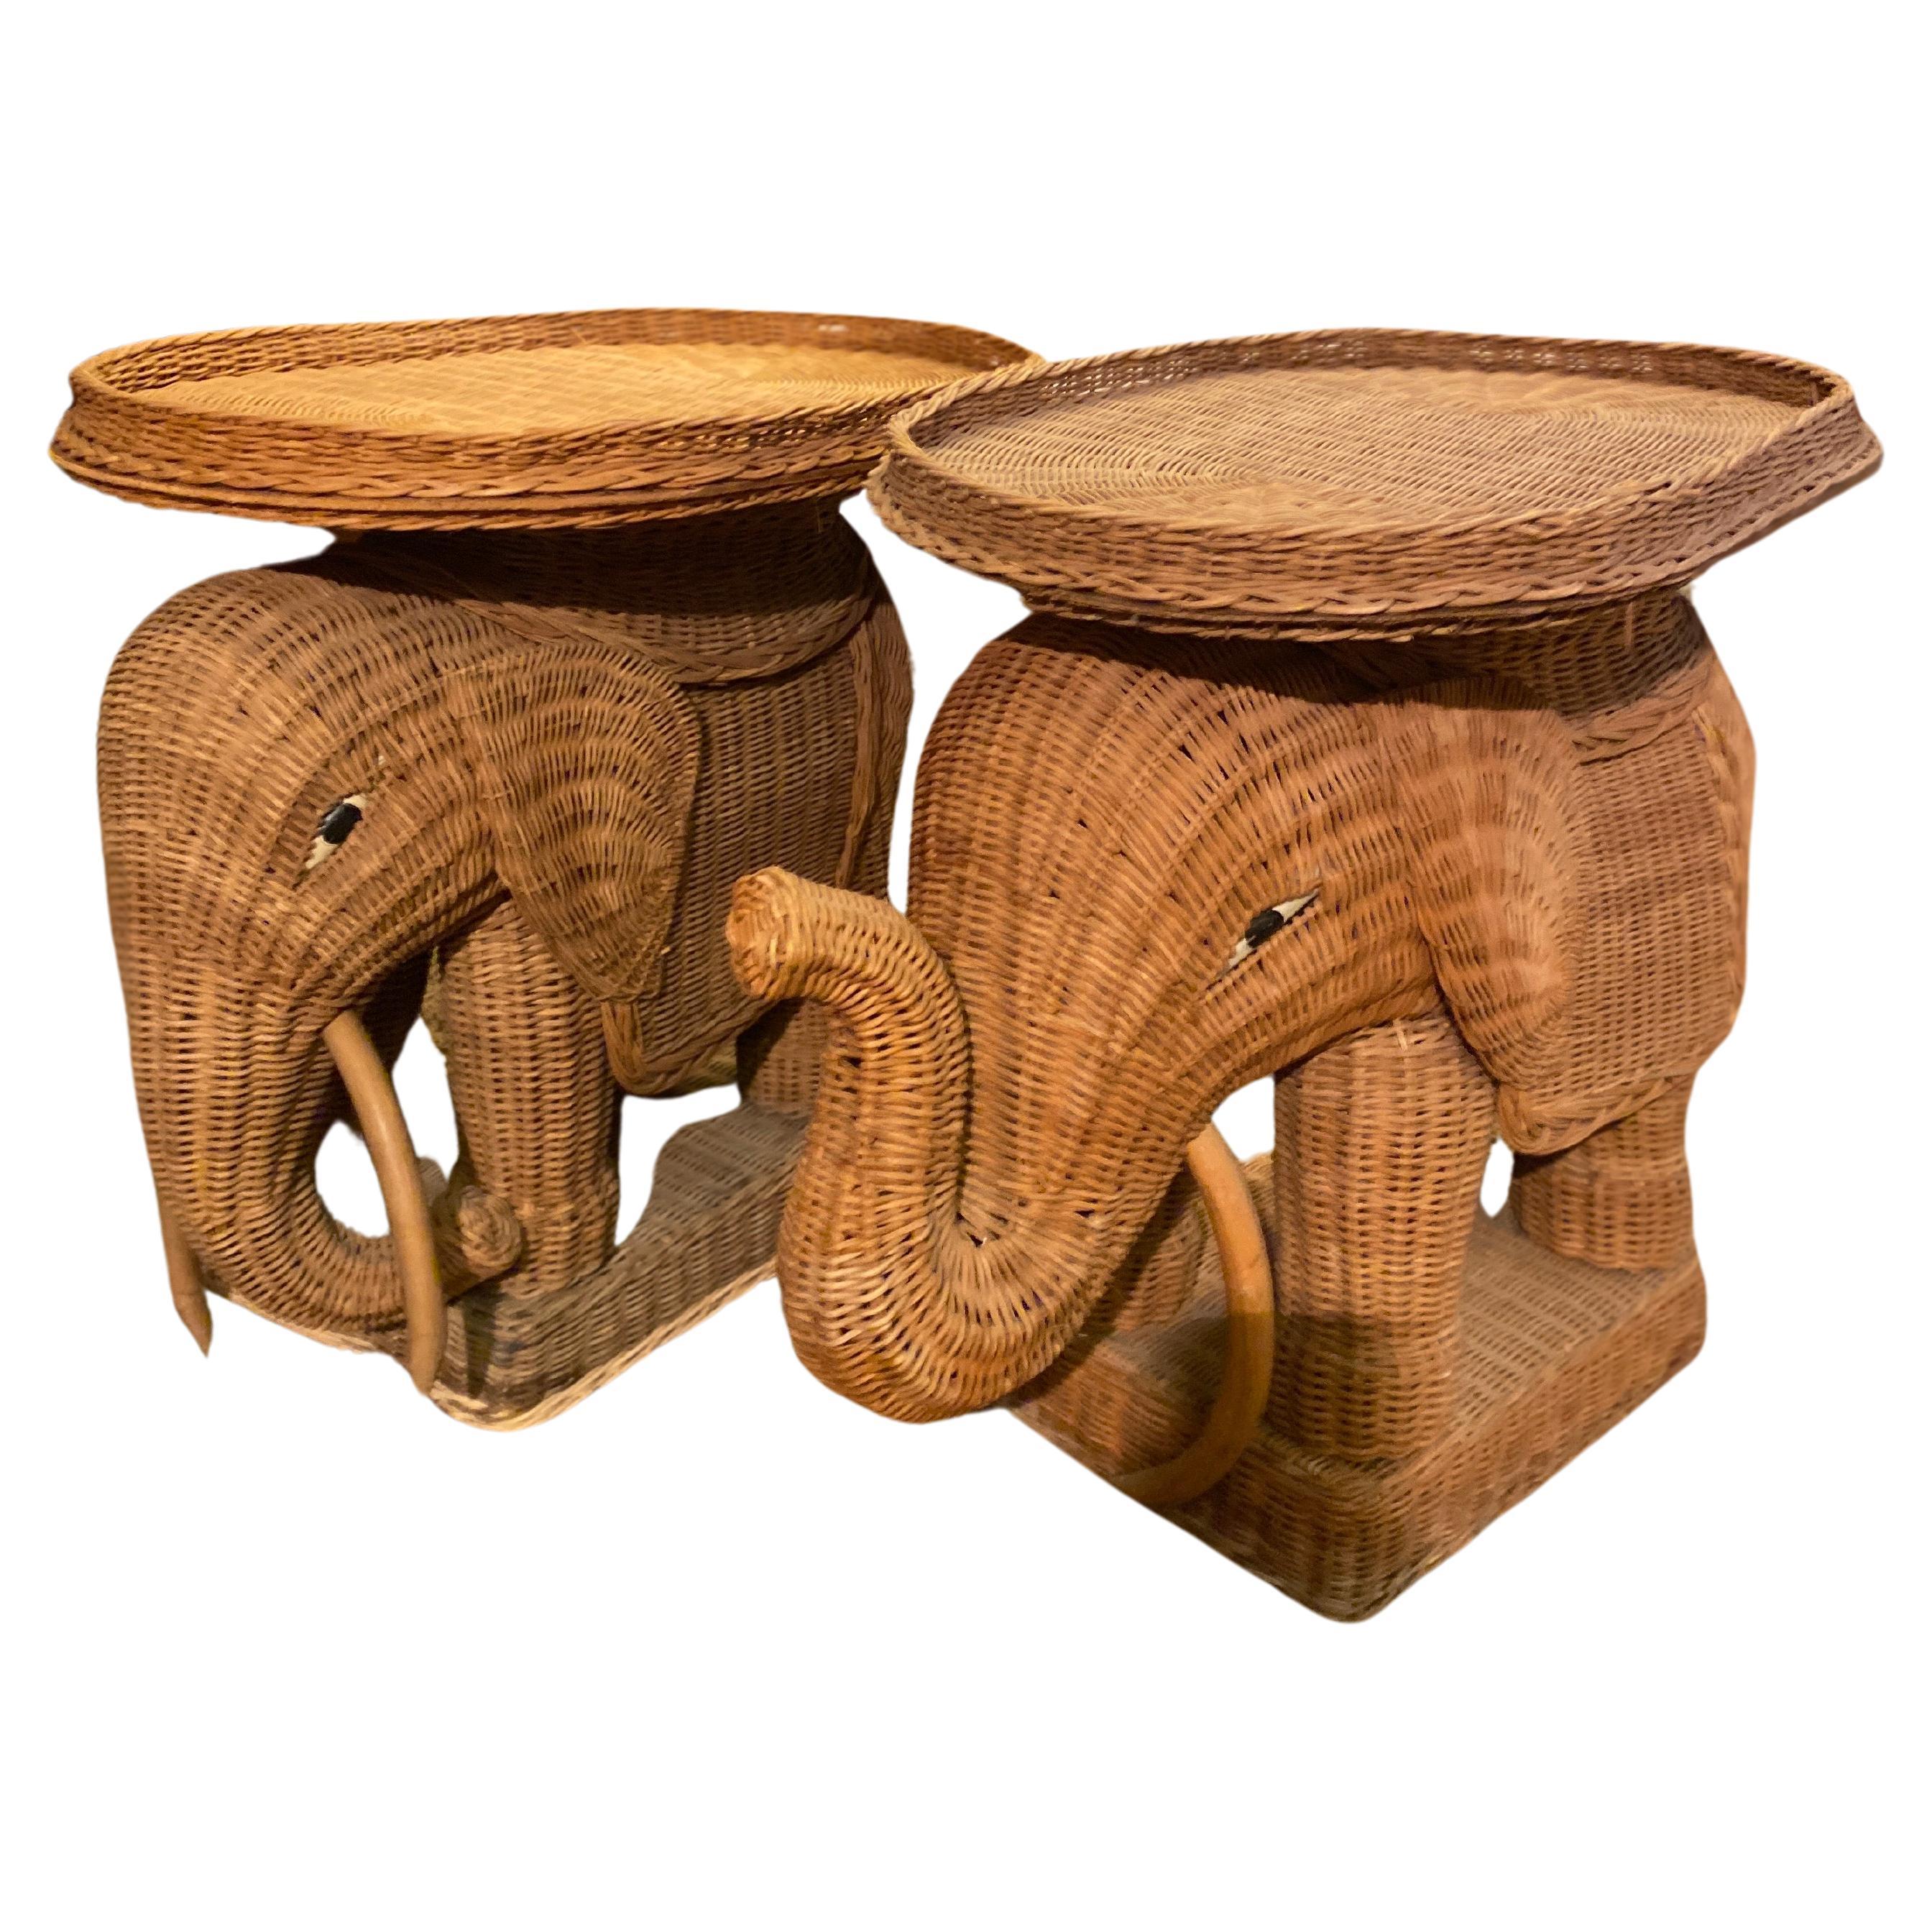 Pair of Elephant Shaped Wicker Sofa Ends, 1970 in Vivaï del Sud Style For Sale